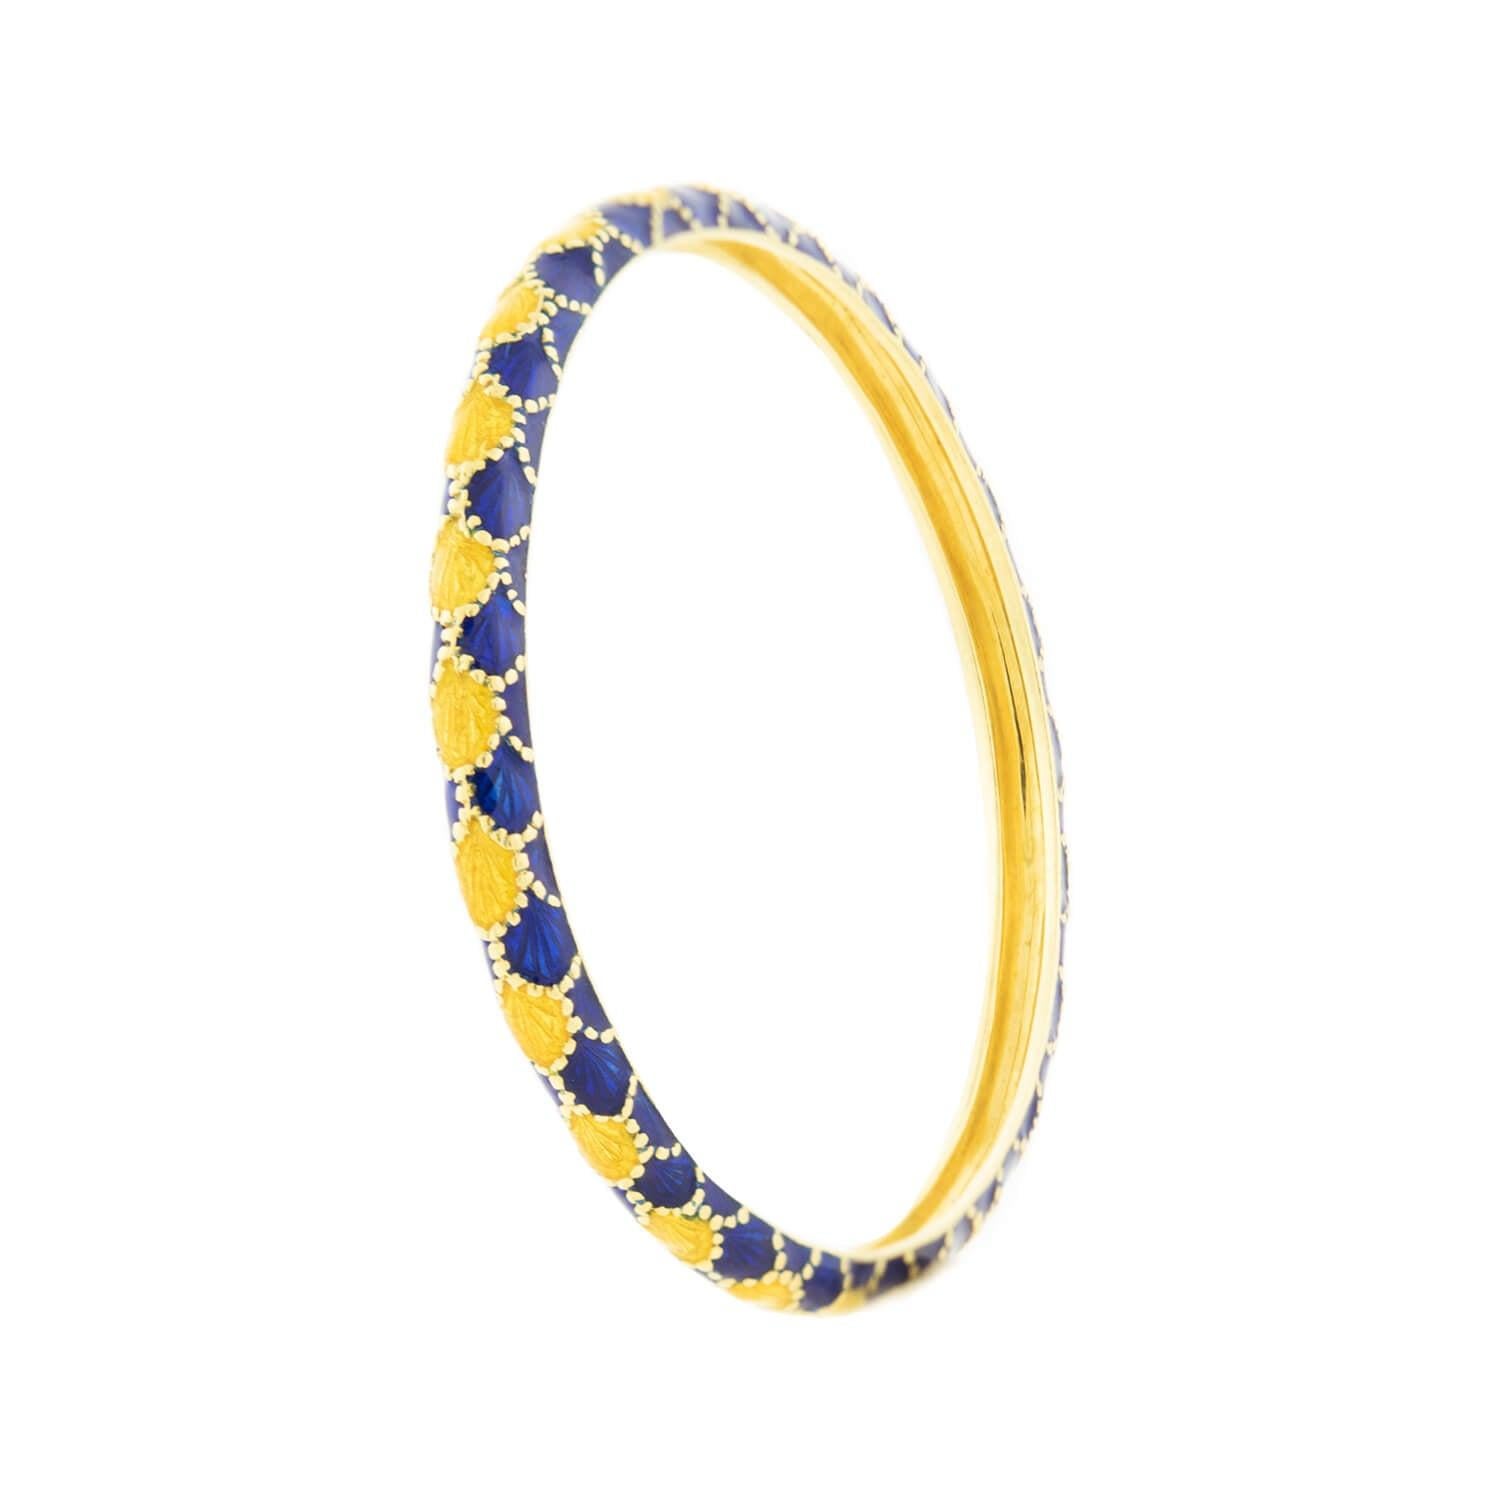 This stylish estate bangle is a signed piece by Tiffany & Co. made in the 1980s! The slip-on bracelet is made of 18k yellow gold with blue and yellow enamel. This bangle features a scale motif with a stipe of yellow scales flanked by overlapping